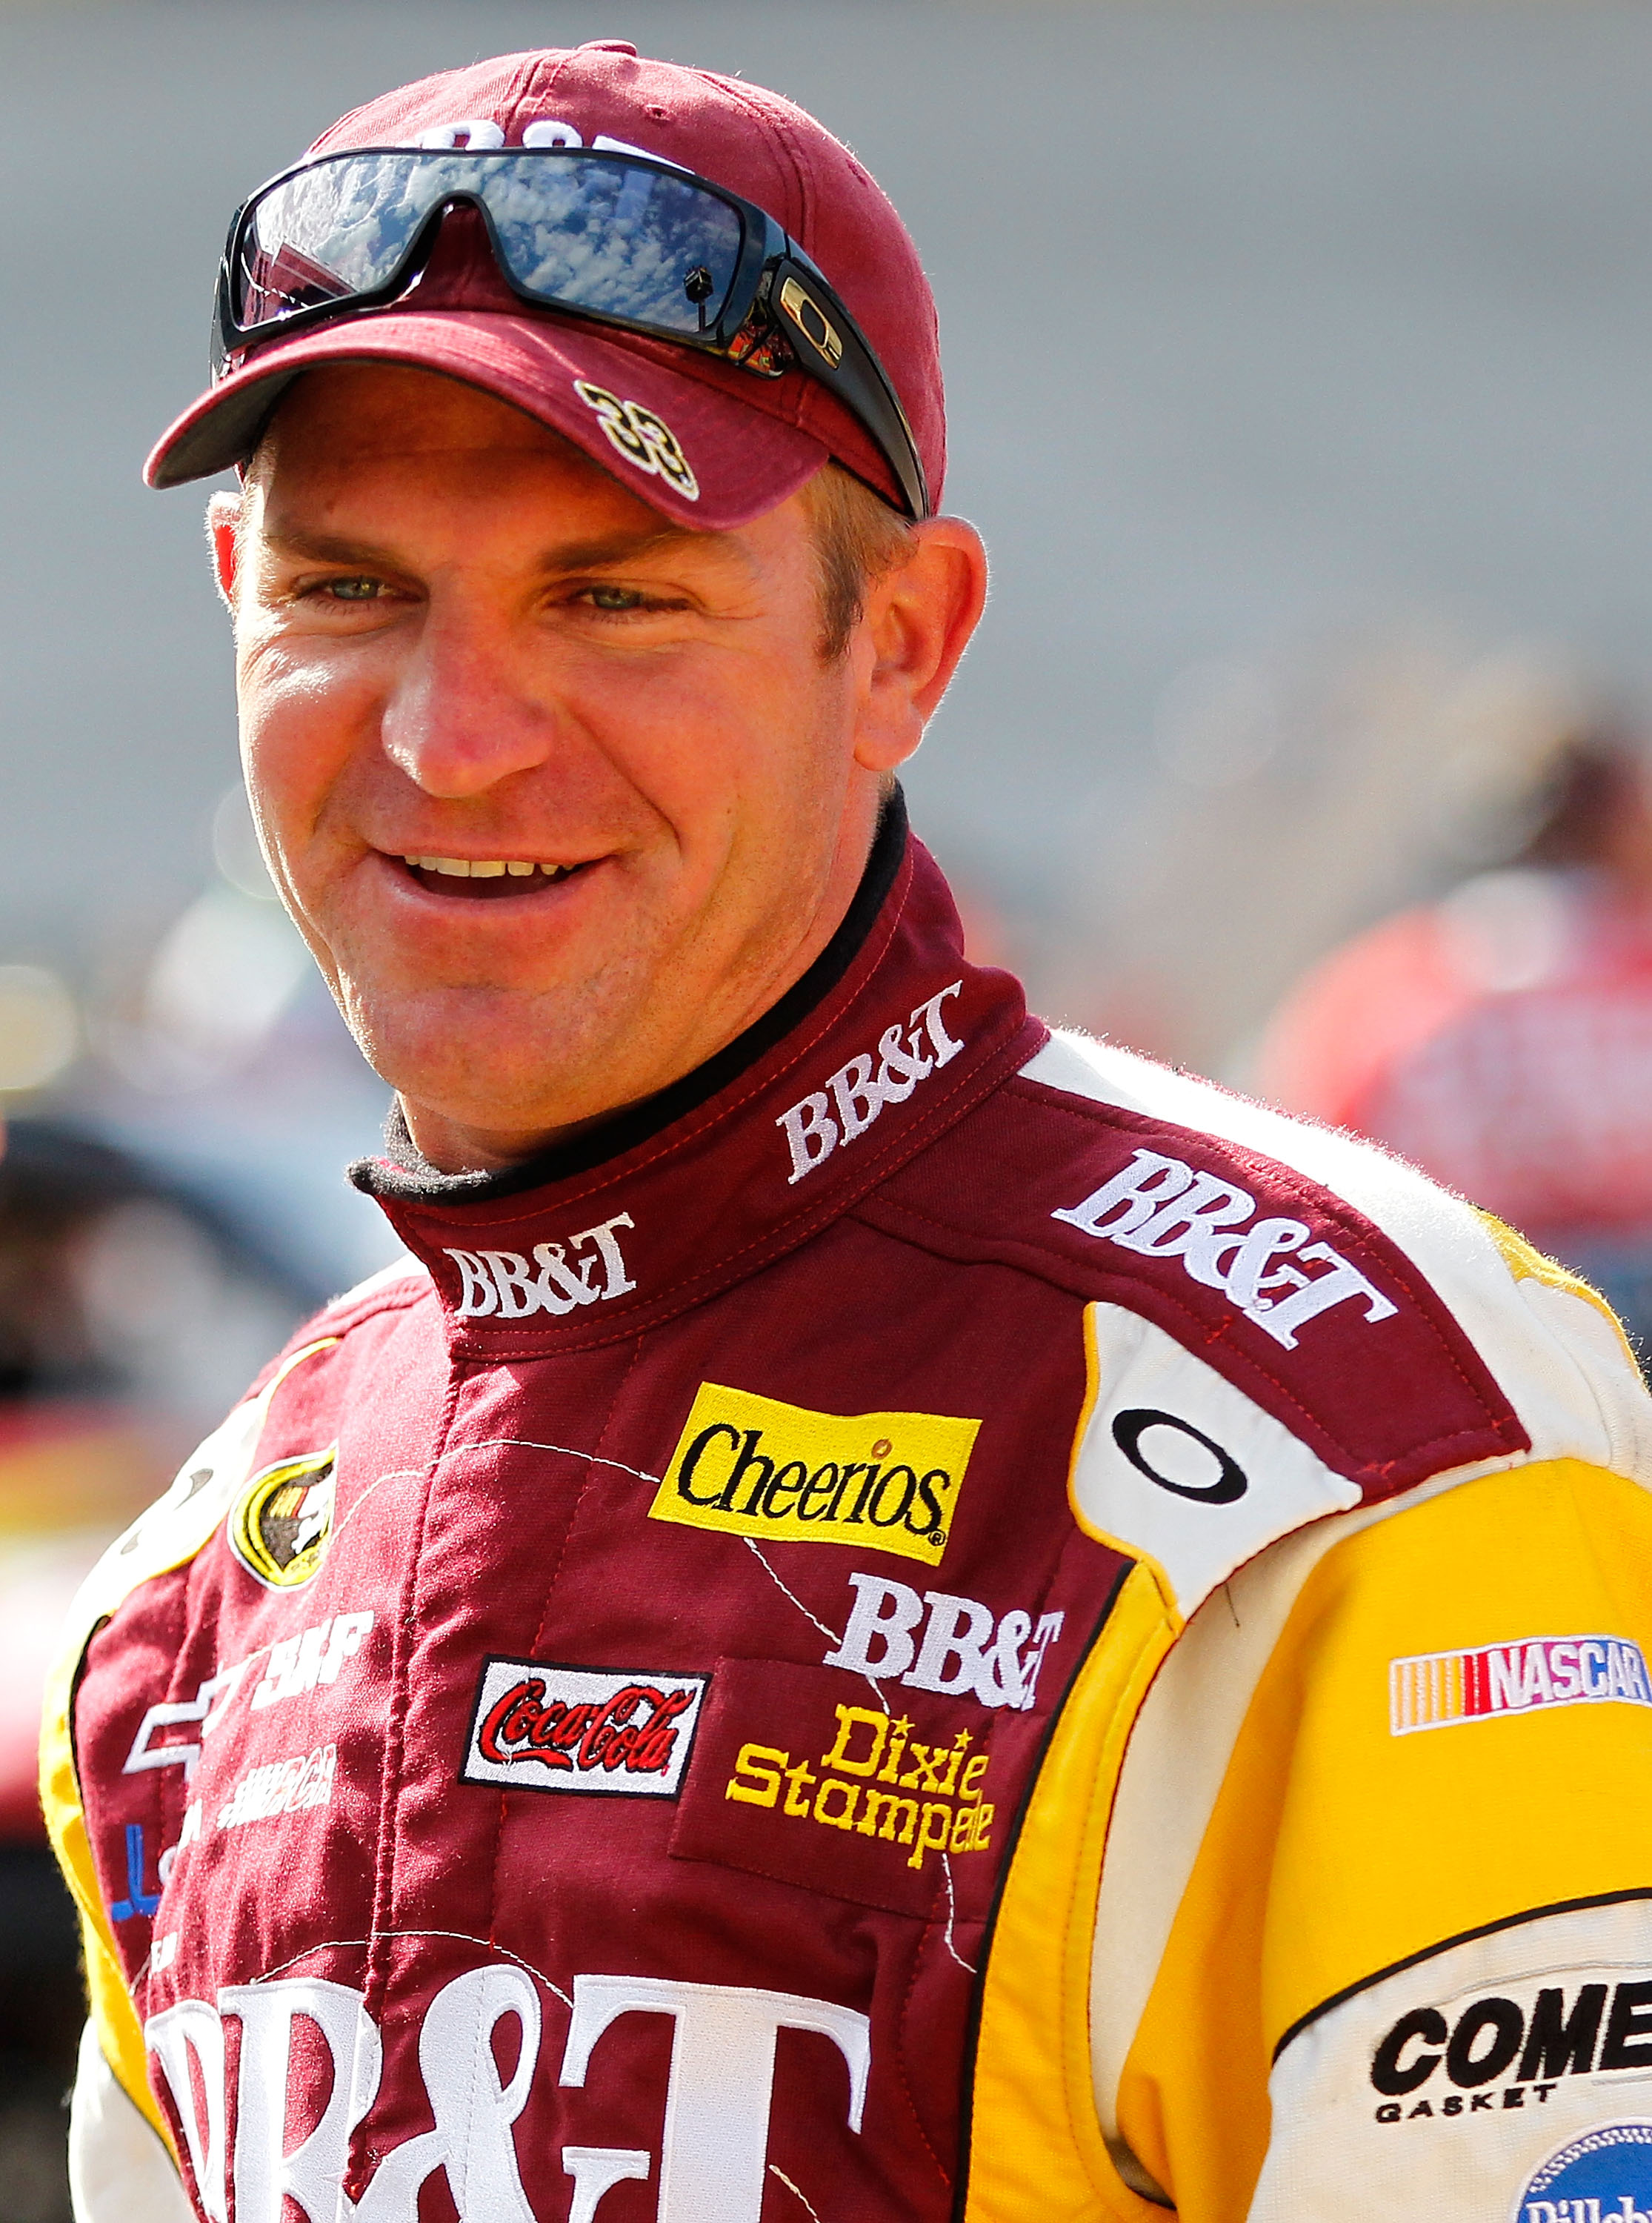 BRISTOL, TN - MARCH 19: Clint Bowyer, driver of the #33 BB&T Chevrolet, smiles prior to practice for the NASCAR Sprint Cup Series Jeff Byrd 500 Presented By Food City at Bristol Motor Speedway on March 19, 2011 in Bristol, Tennessee.  (Photo by Geoff Burk